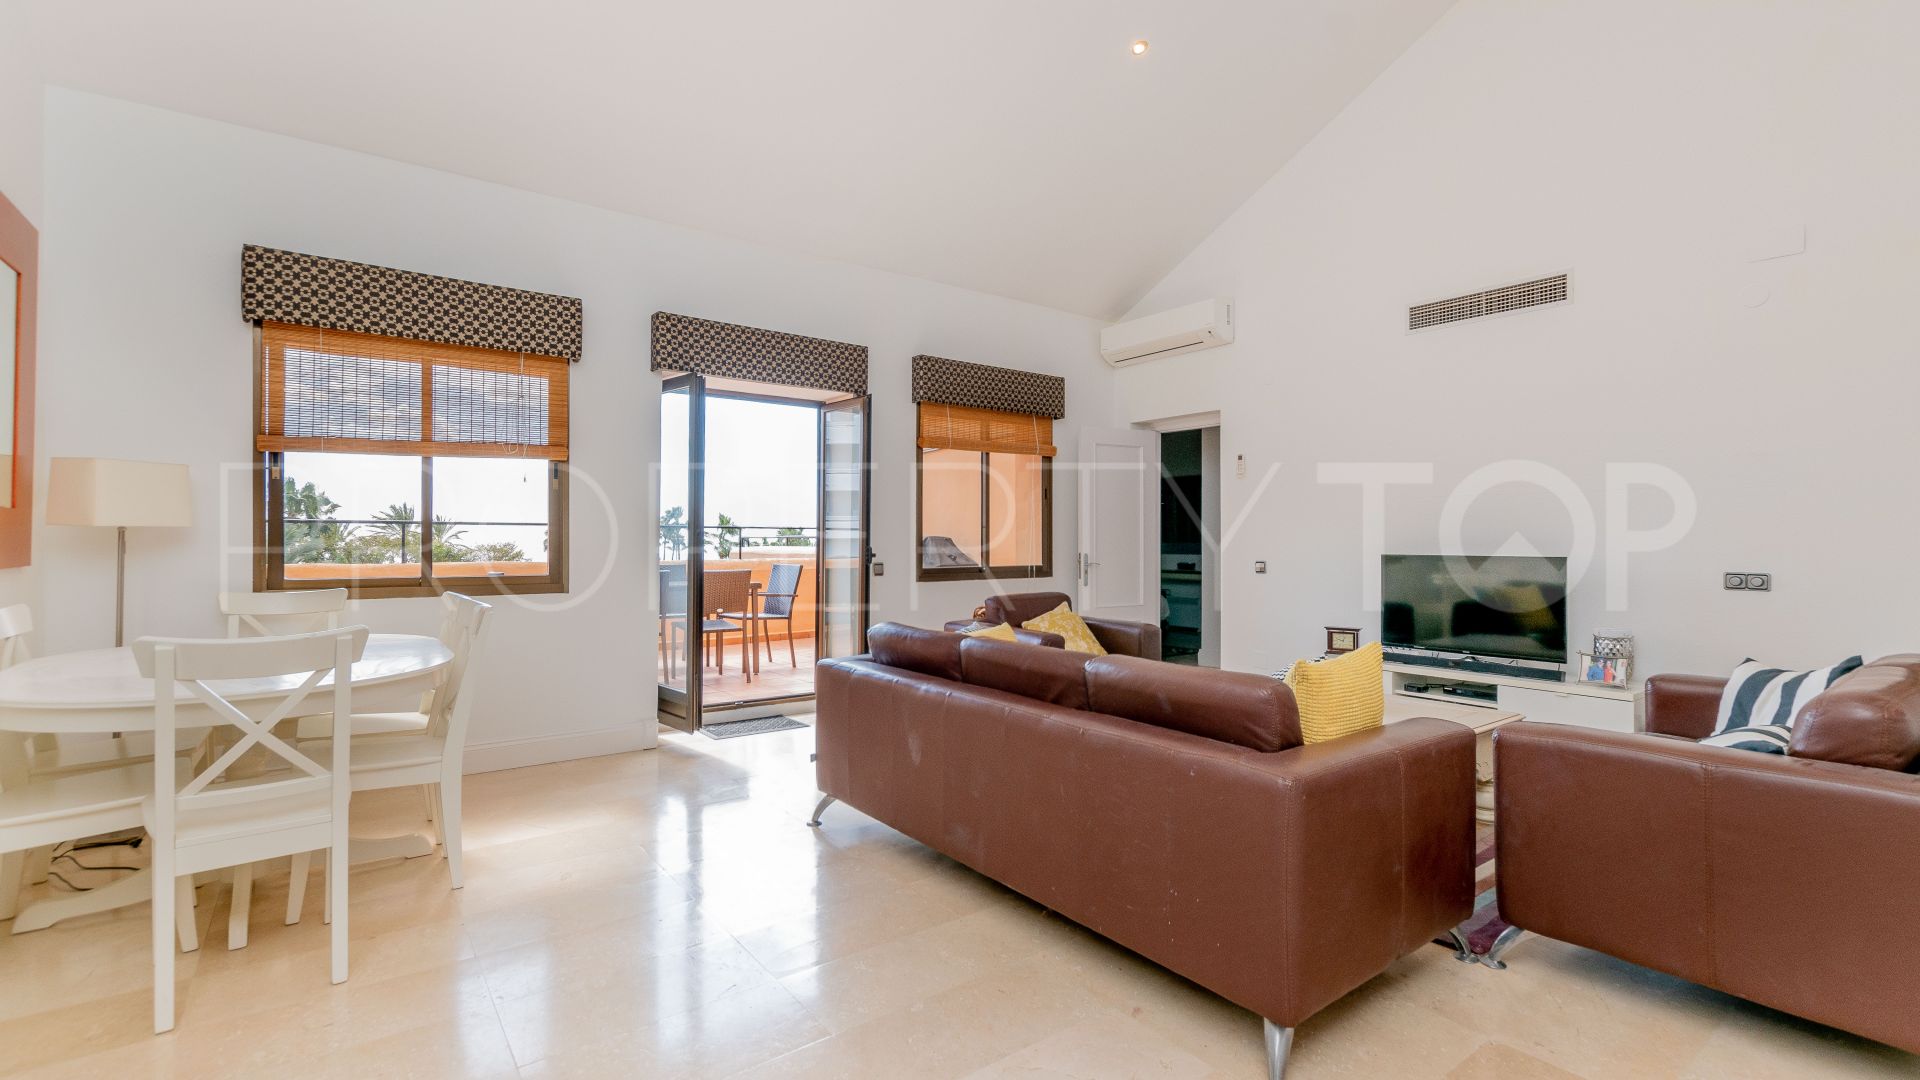 For sale 3 bedrooms duplex penthouse in Riviera Andaluza